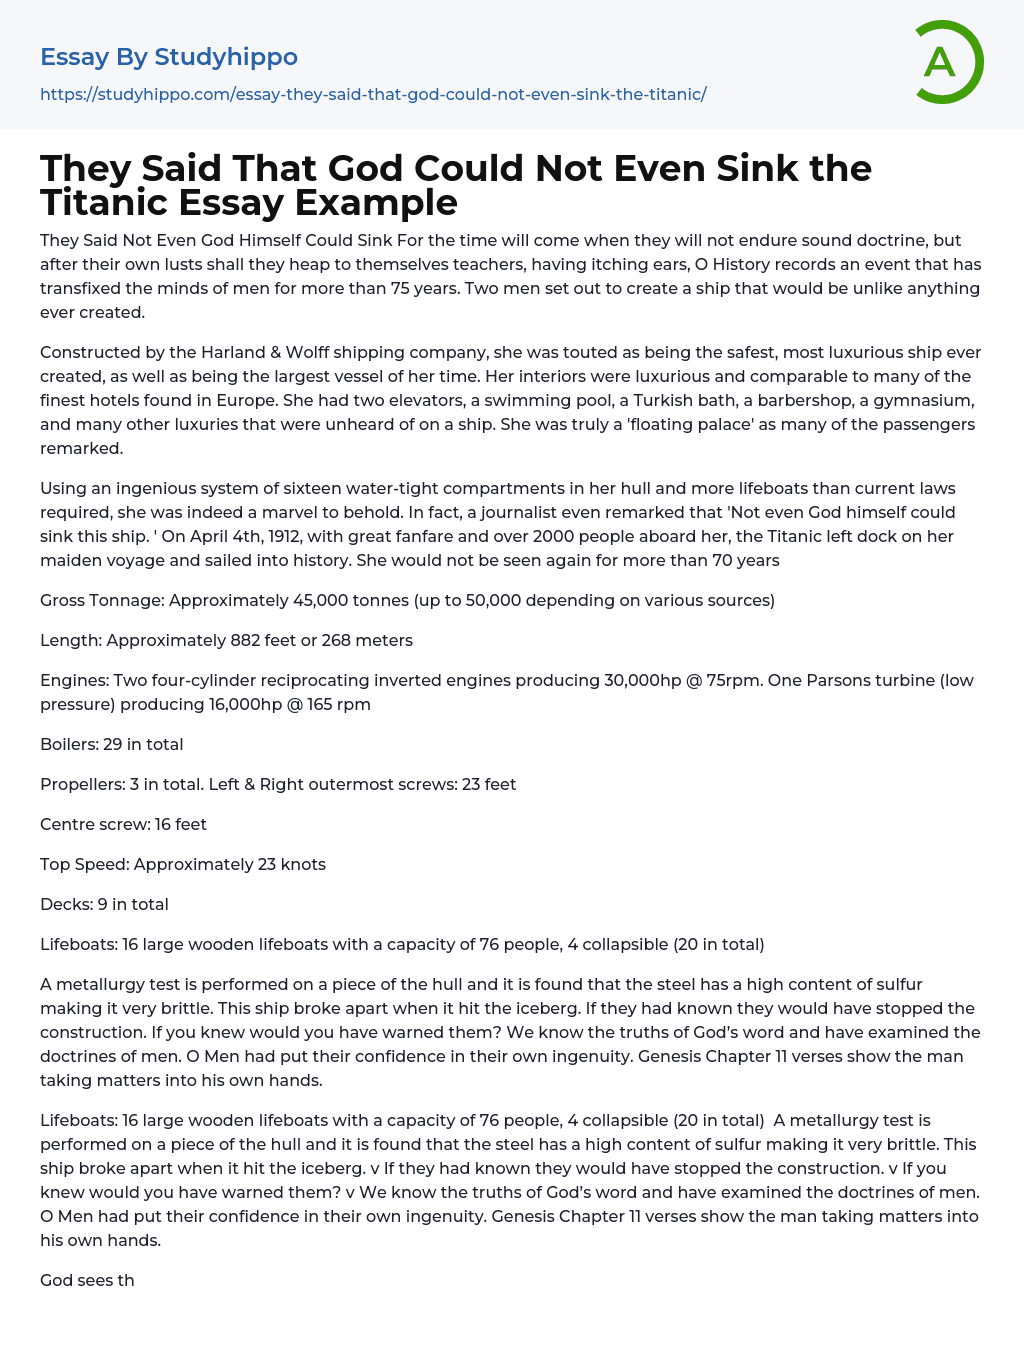 They Said That God Could Not Even Sink the Titanic Essay Example